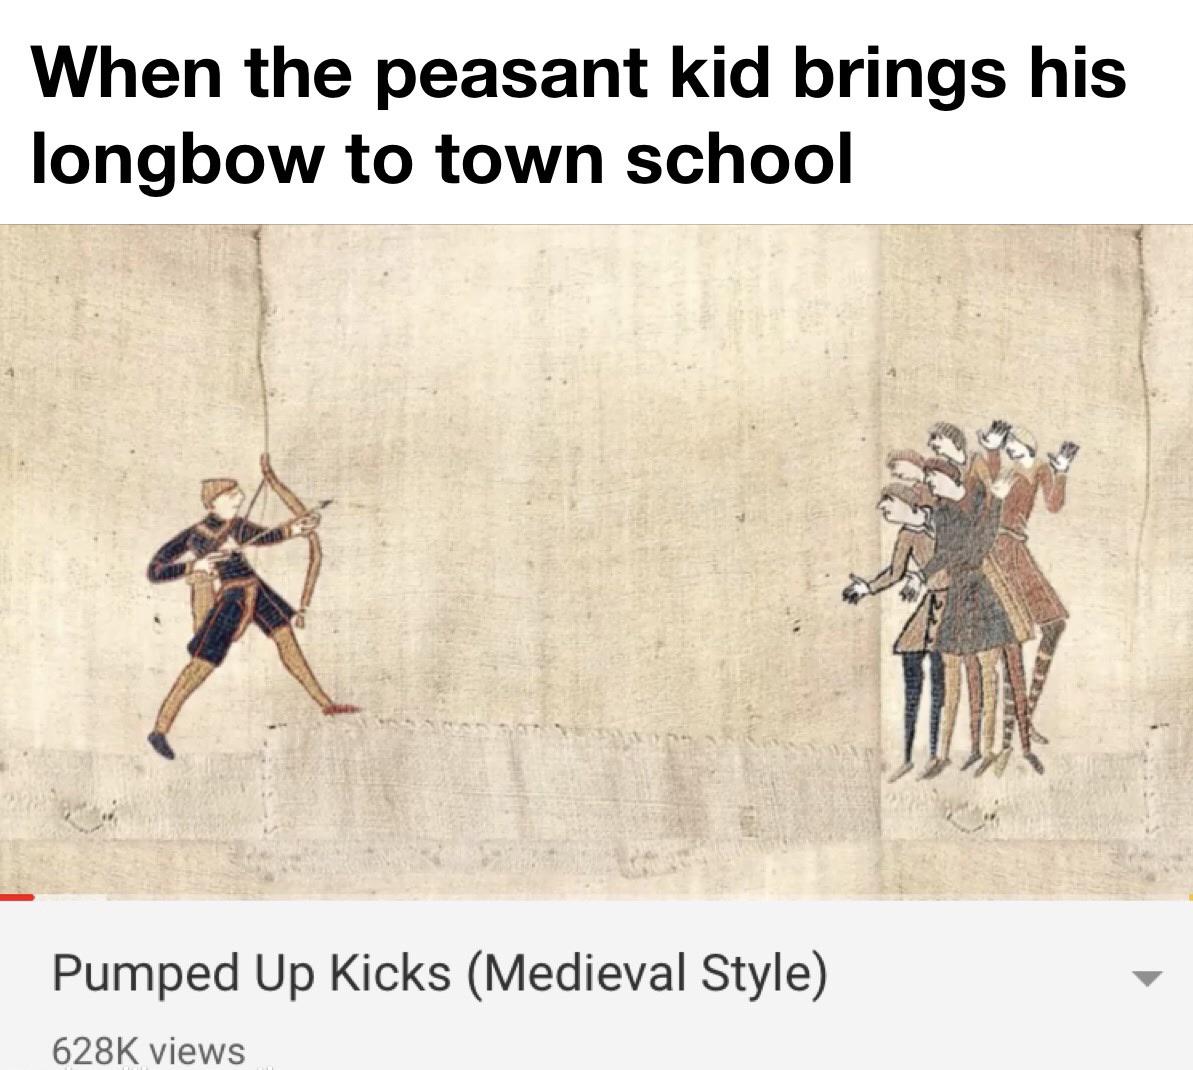 History, Best, HistoryMemes, YMmcI, Kl4, Runeth History Memes History, Best, HistoryMemes, YMmcI, Kl4, Runeth text: When the peasant kid brings his longbow to town school Pumped Up Kicks (Medieval Style) 628K views 